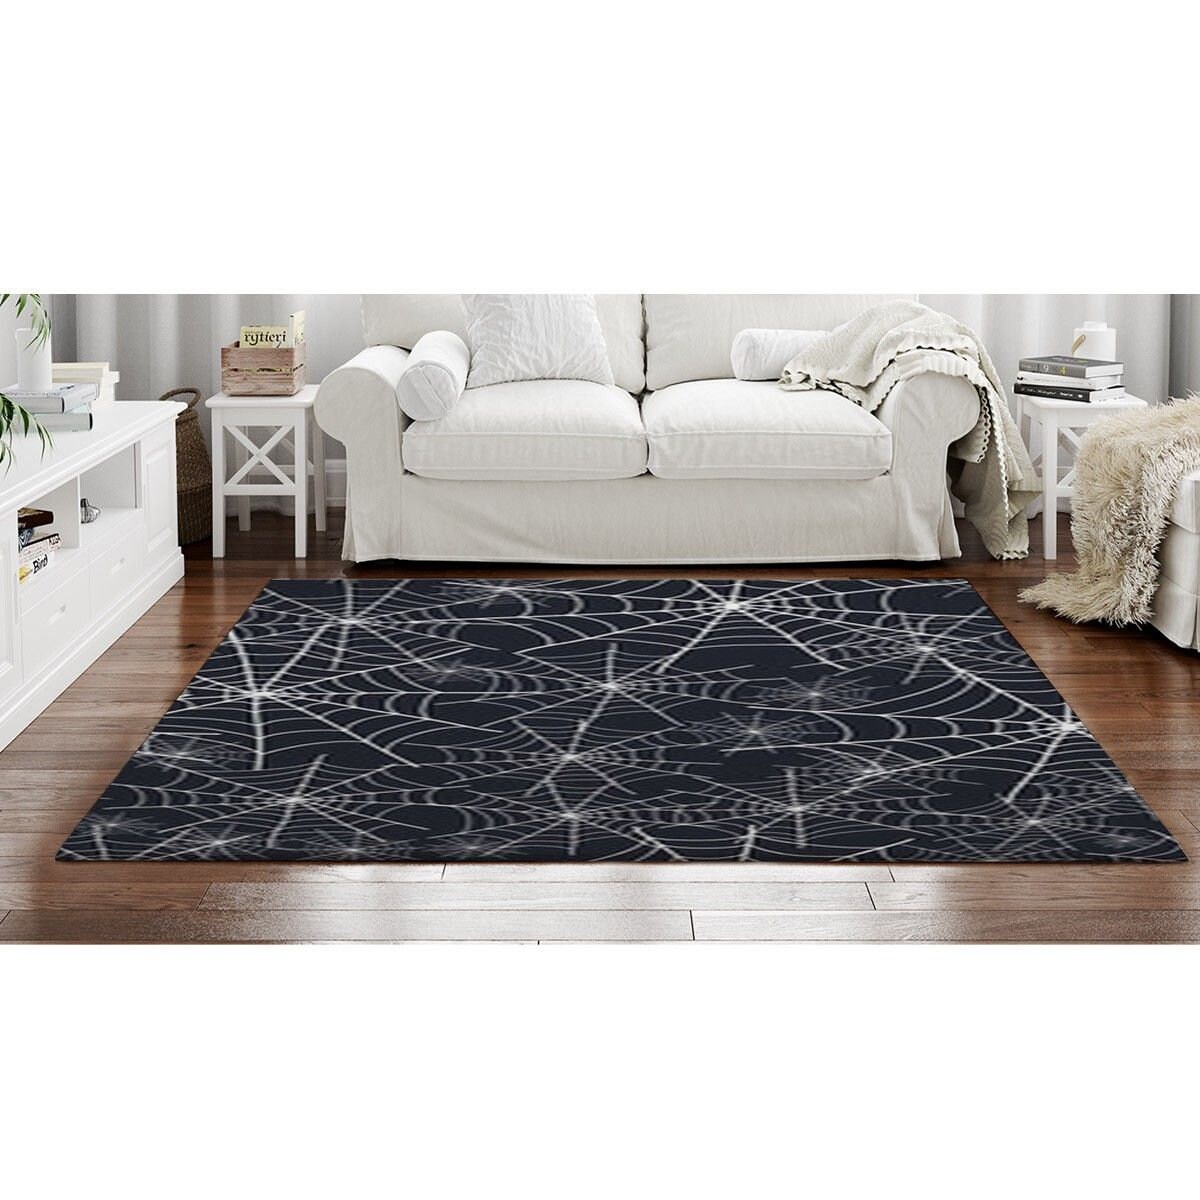 Spider Rugs for Entryway Bedroom Living Room, Halloween Scary 2x3 Rug,  Washable Non-Slip Soft Low Pile Area Rug, Dorm Dining Room Nursery Carpet